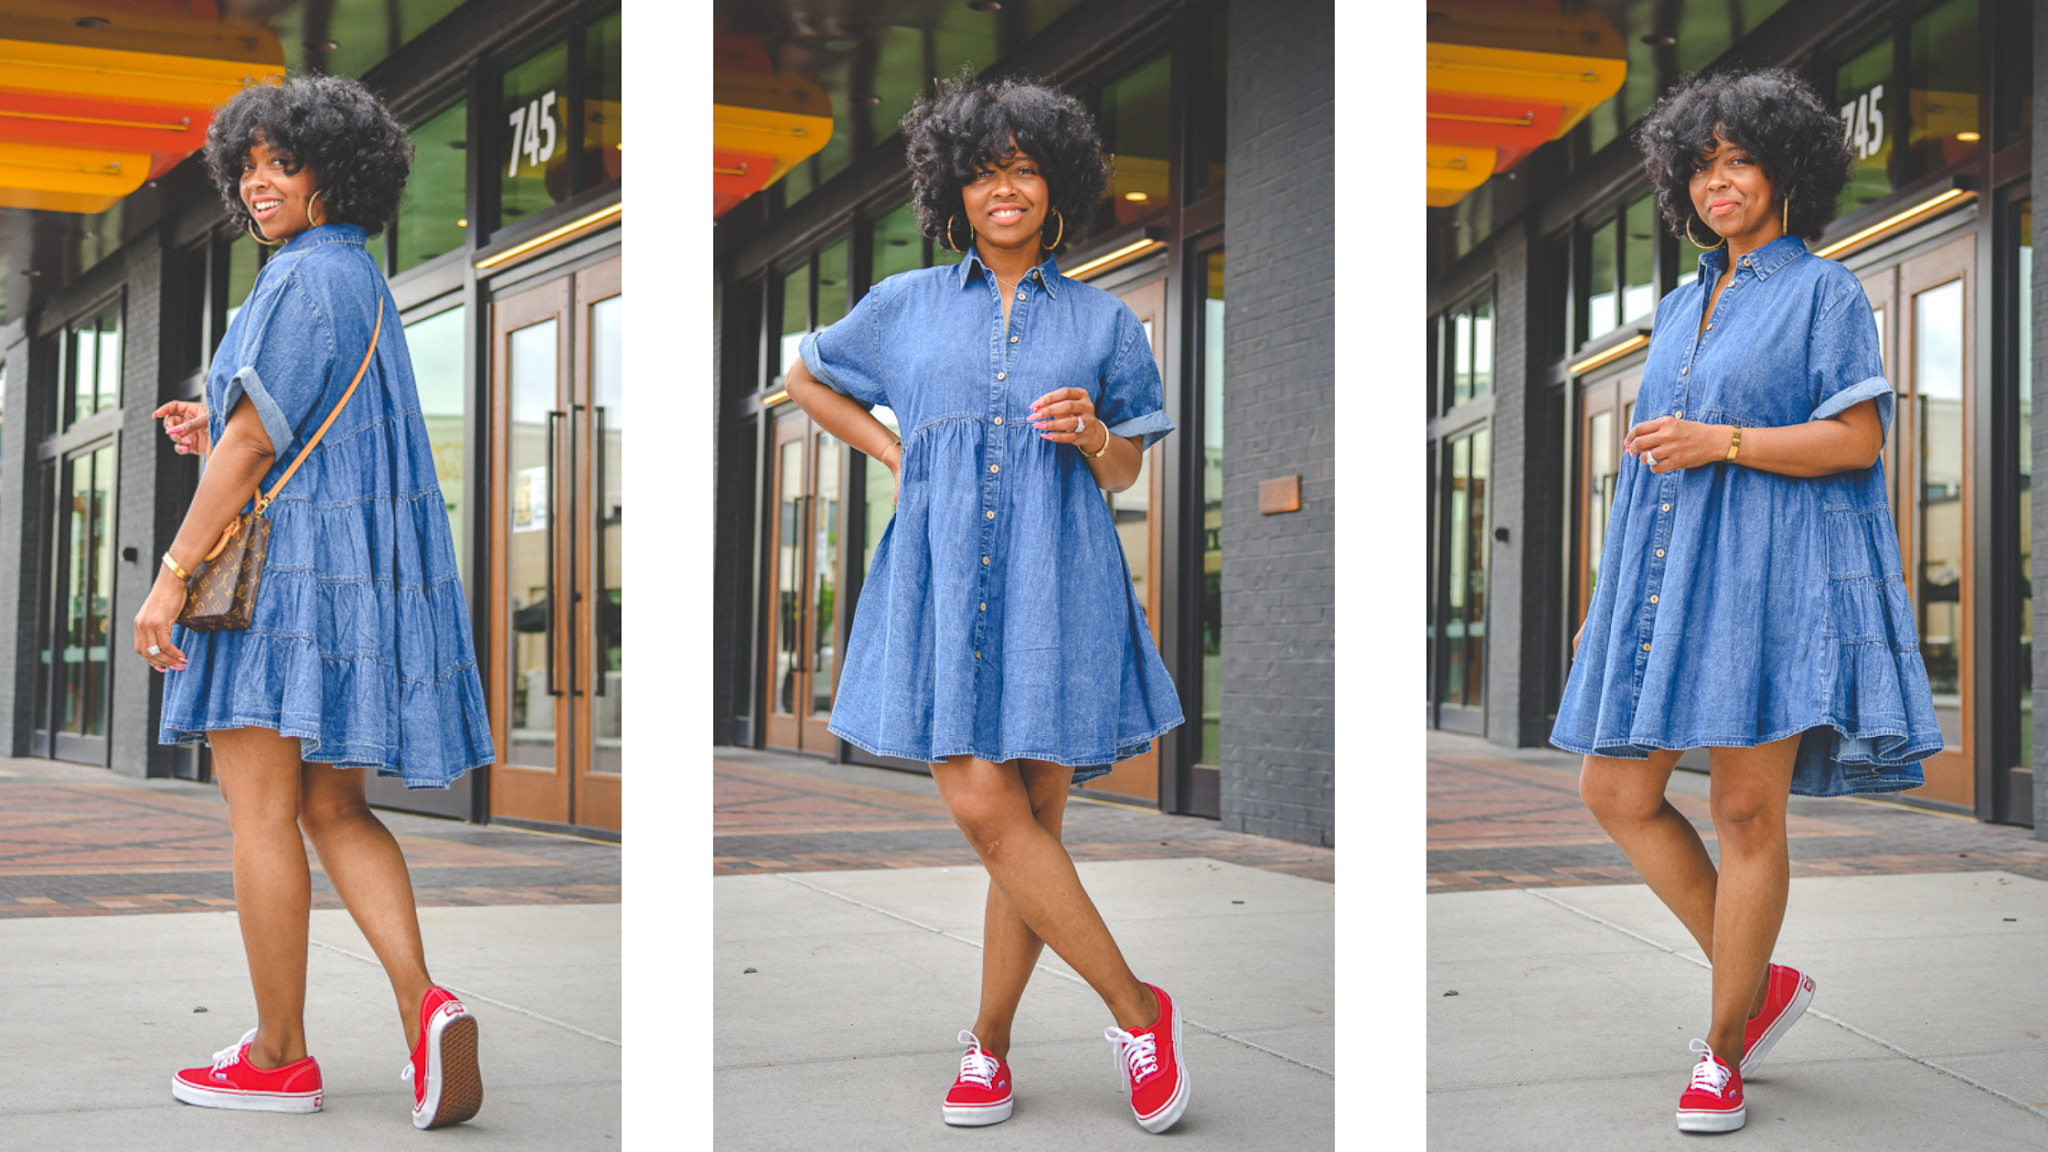 SWEENEE STYLE, OUTFIT IDEA, DENIM DRESS, SUMMER OUTFIT IDEA